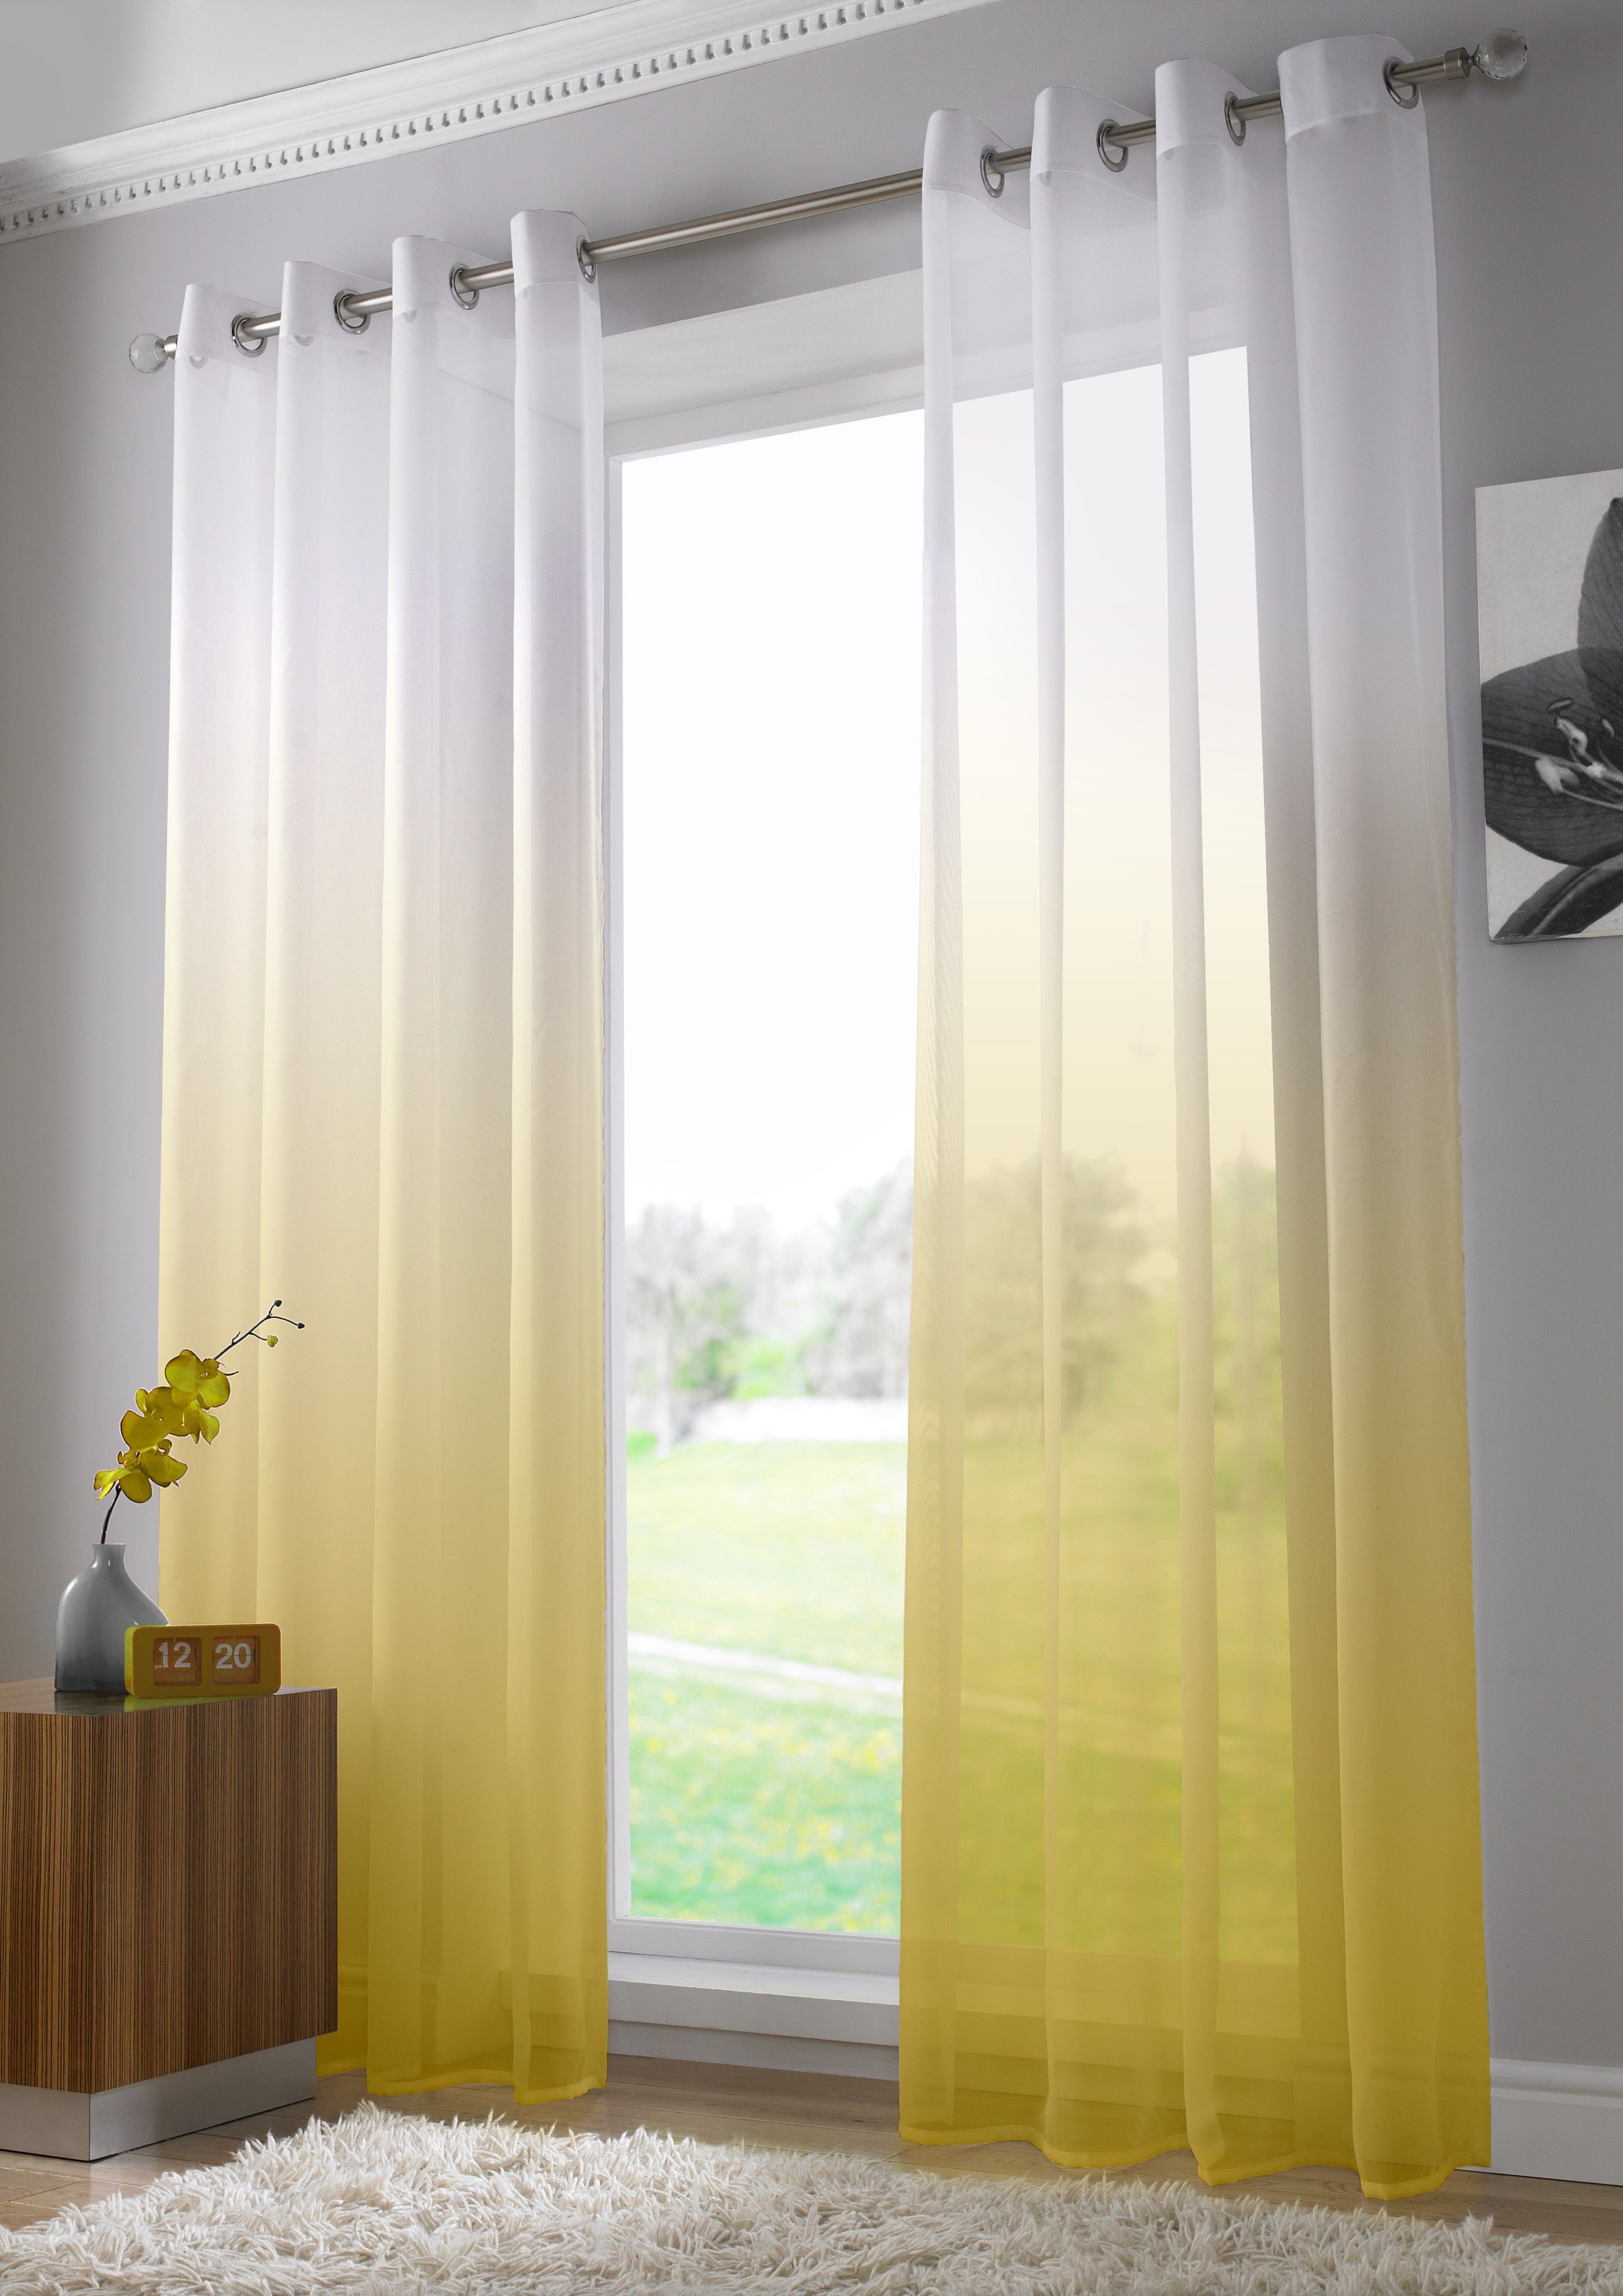 This Modern And Bright Voile Panel Features A Two Tone Intended For Arm And Hammer Curtains Fresh Odor Neutralizing Single Curtain Panels (View 19 of 20)